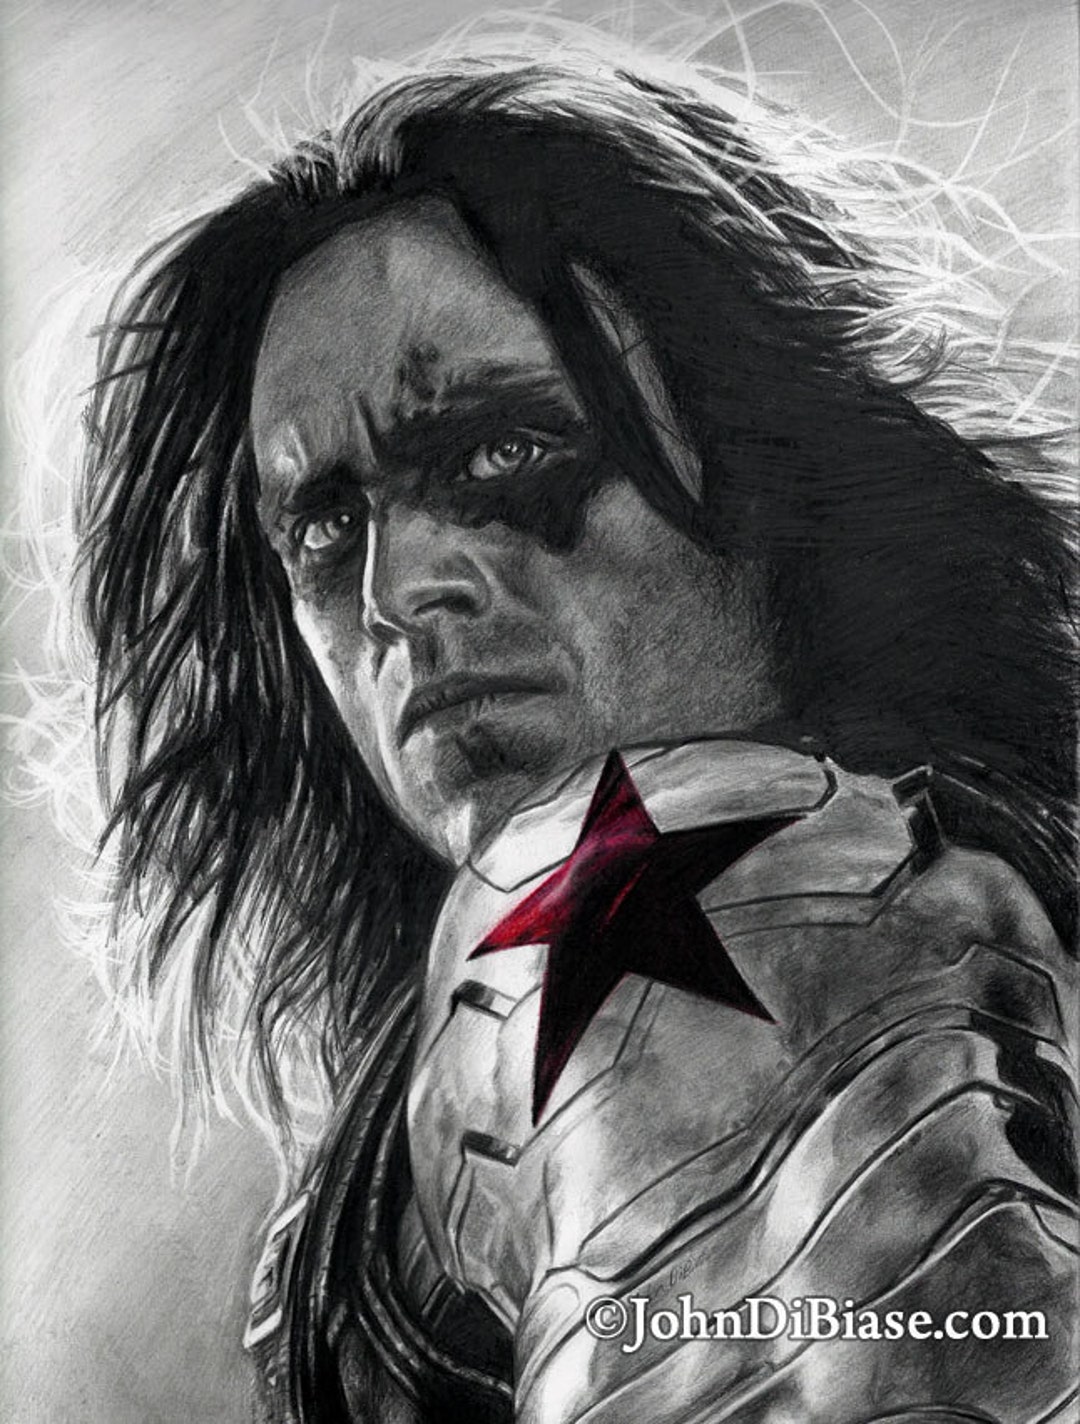 Buy Drawing Print of the Winter Soldier sebastian Stan From Online ...